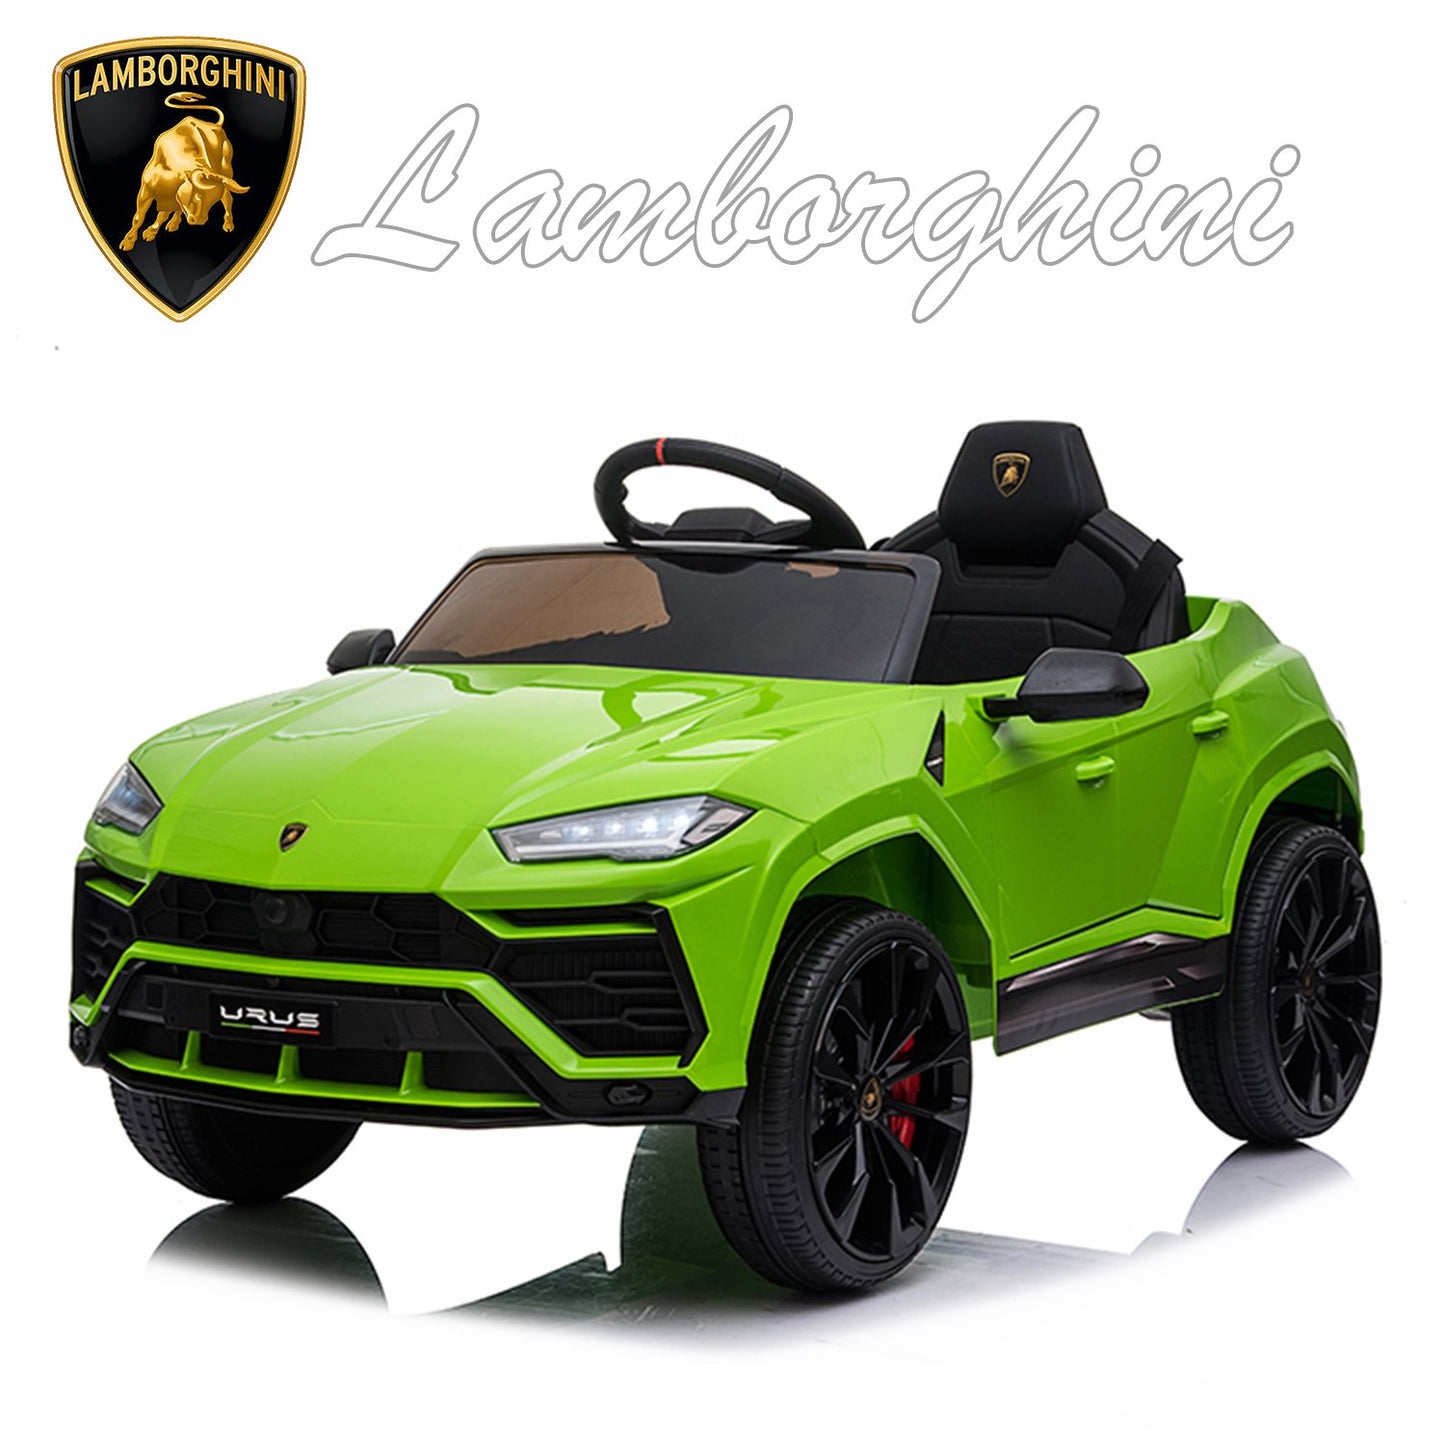 Green Ride on Car for Boys Girls, Licensed Lamborghini Toy Car Vehicle, Kids 12V Electric Ride on Toy with Remote Control, LED Lights, MP3 Player, Horn, 3 Speeds, D8467